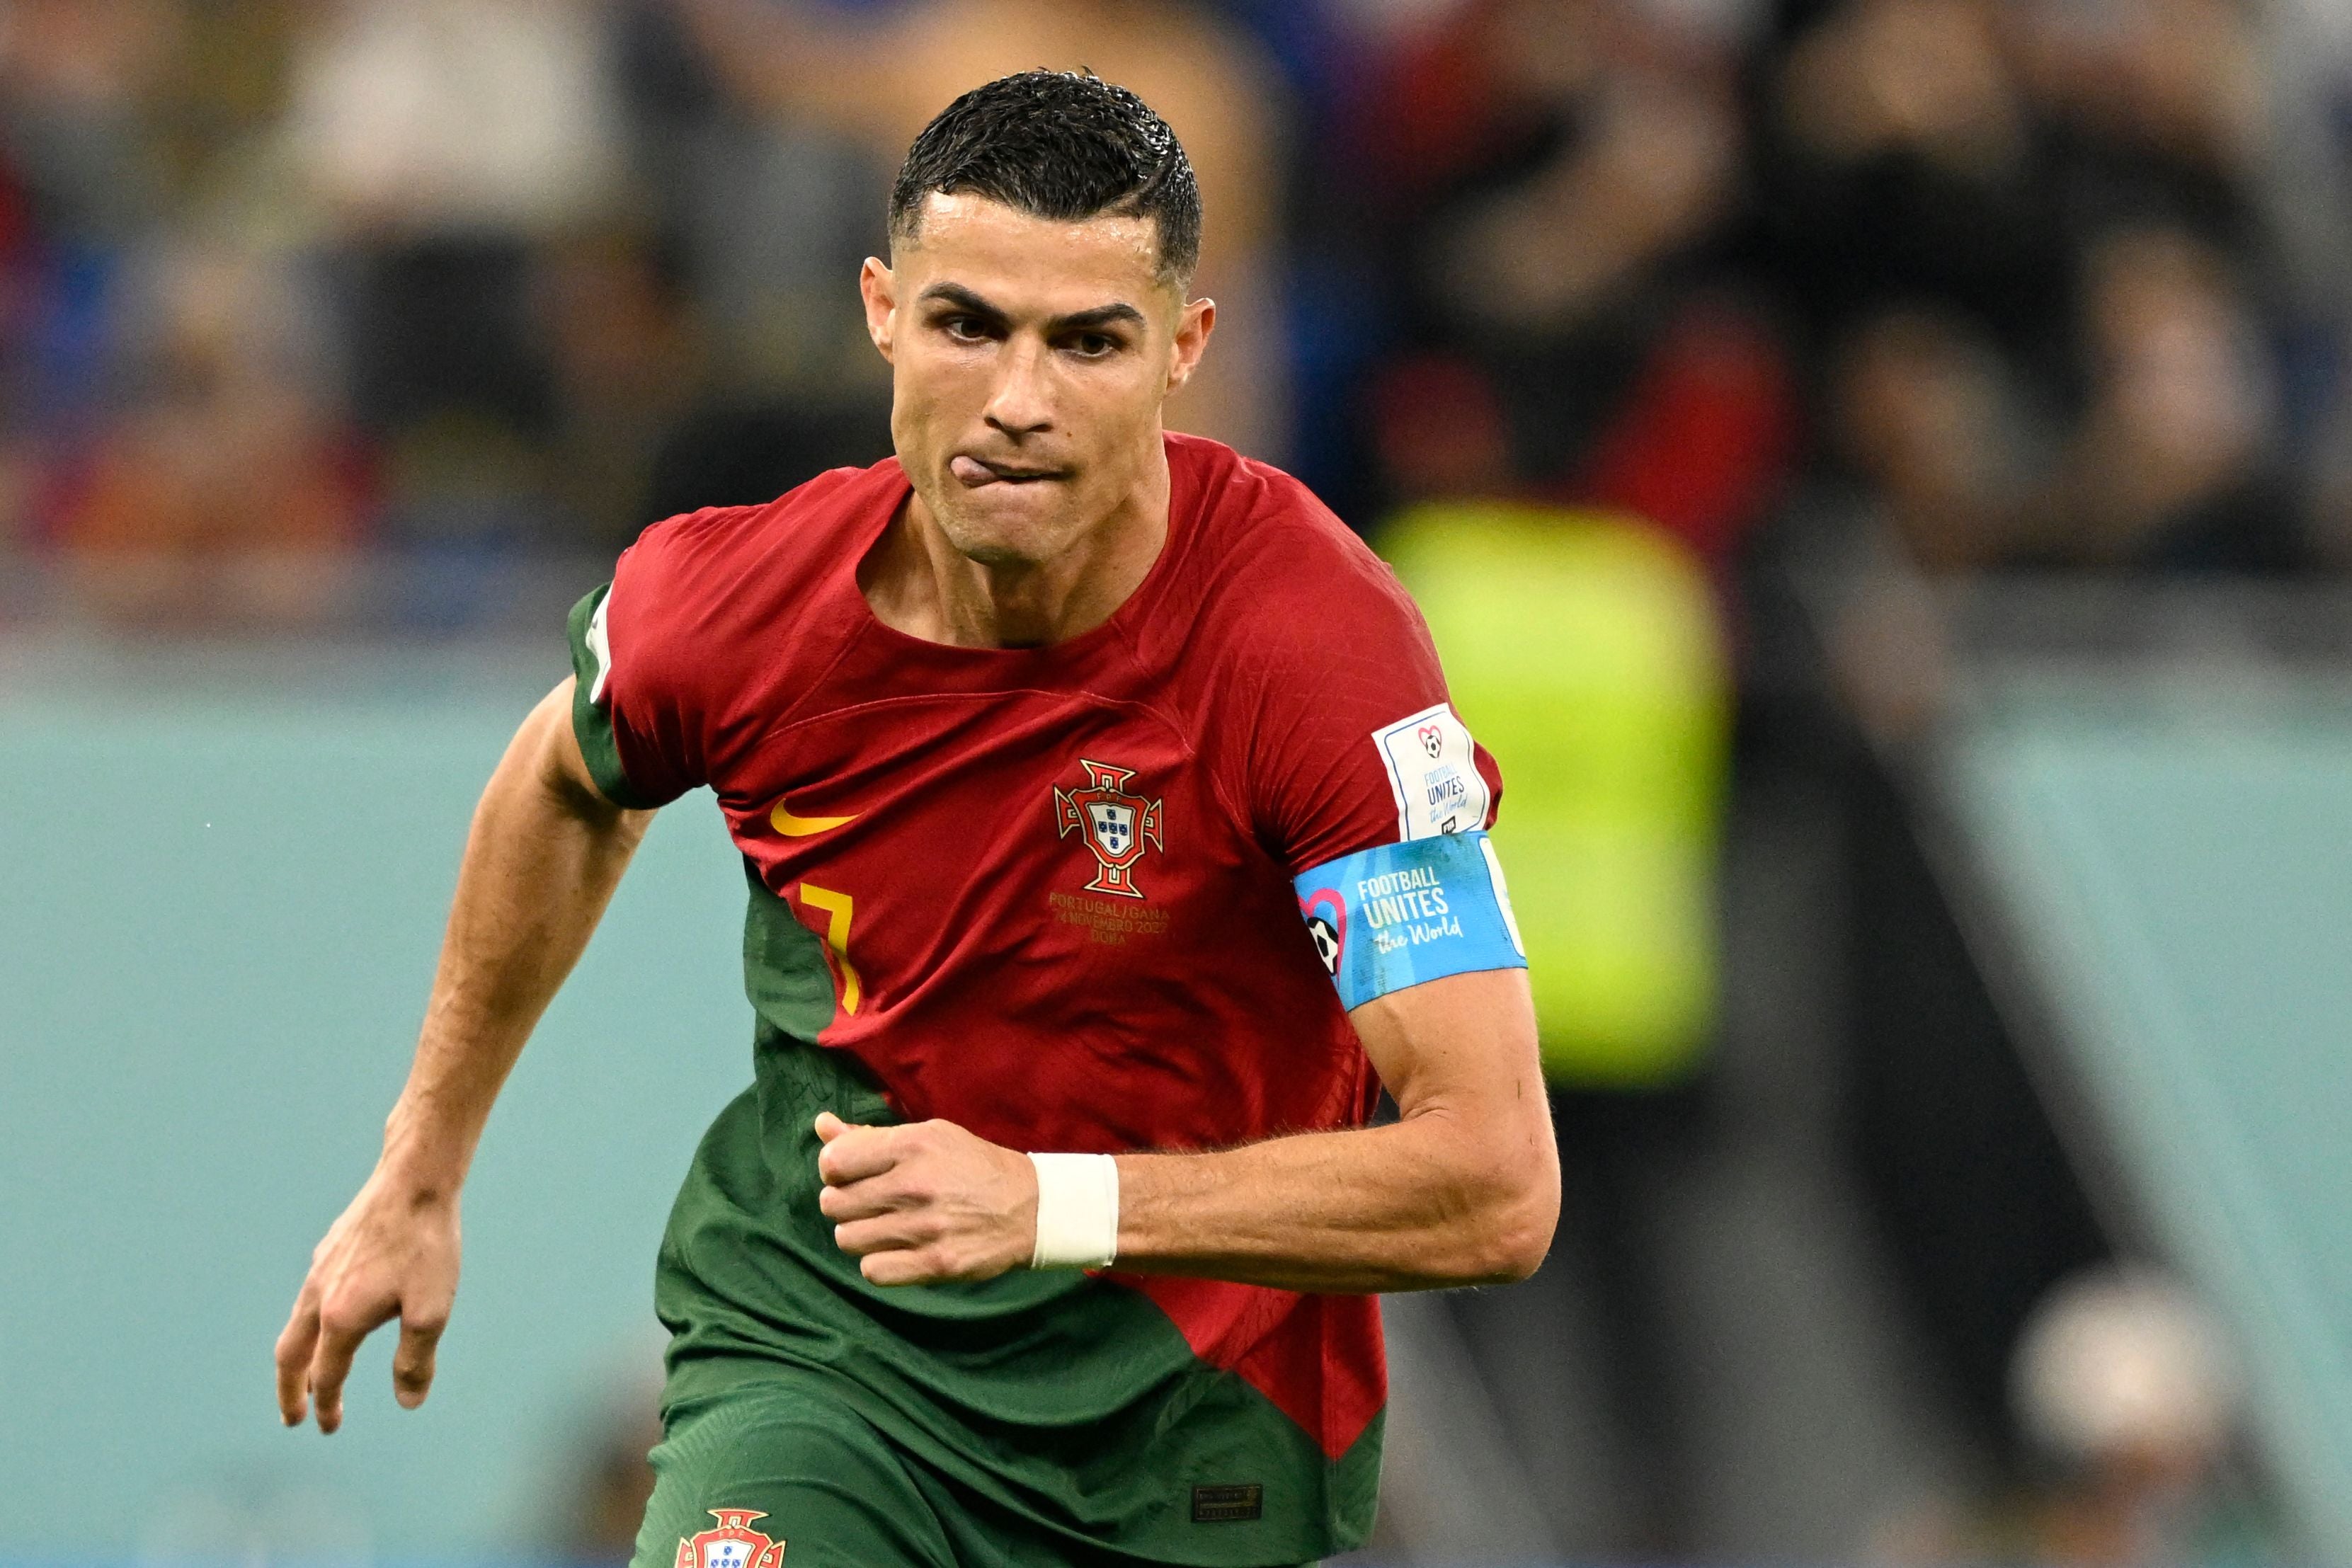 Cristiano Ronaldo is back in action after Portugal’s opening win